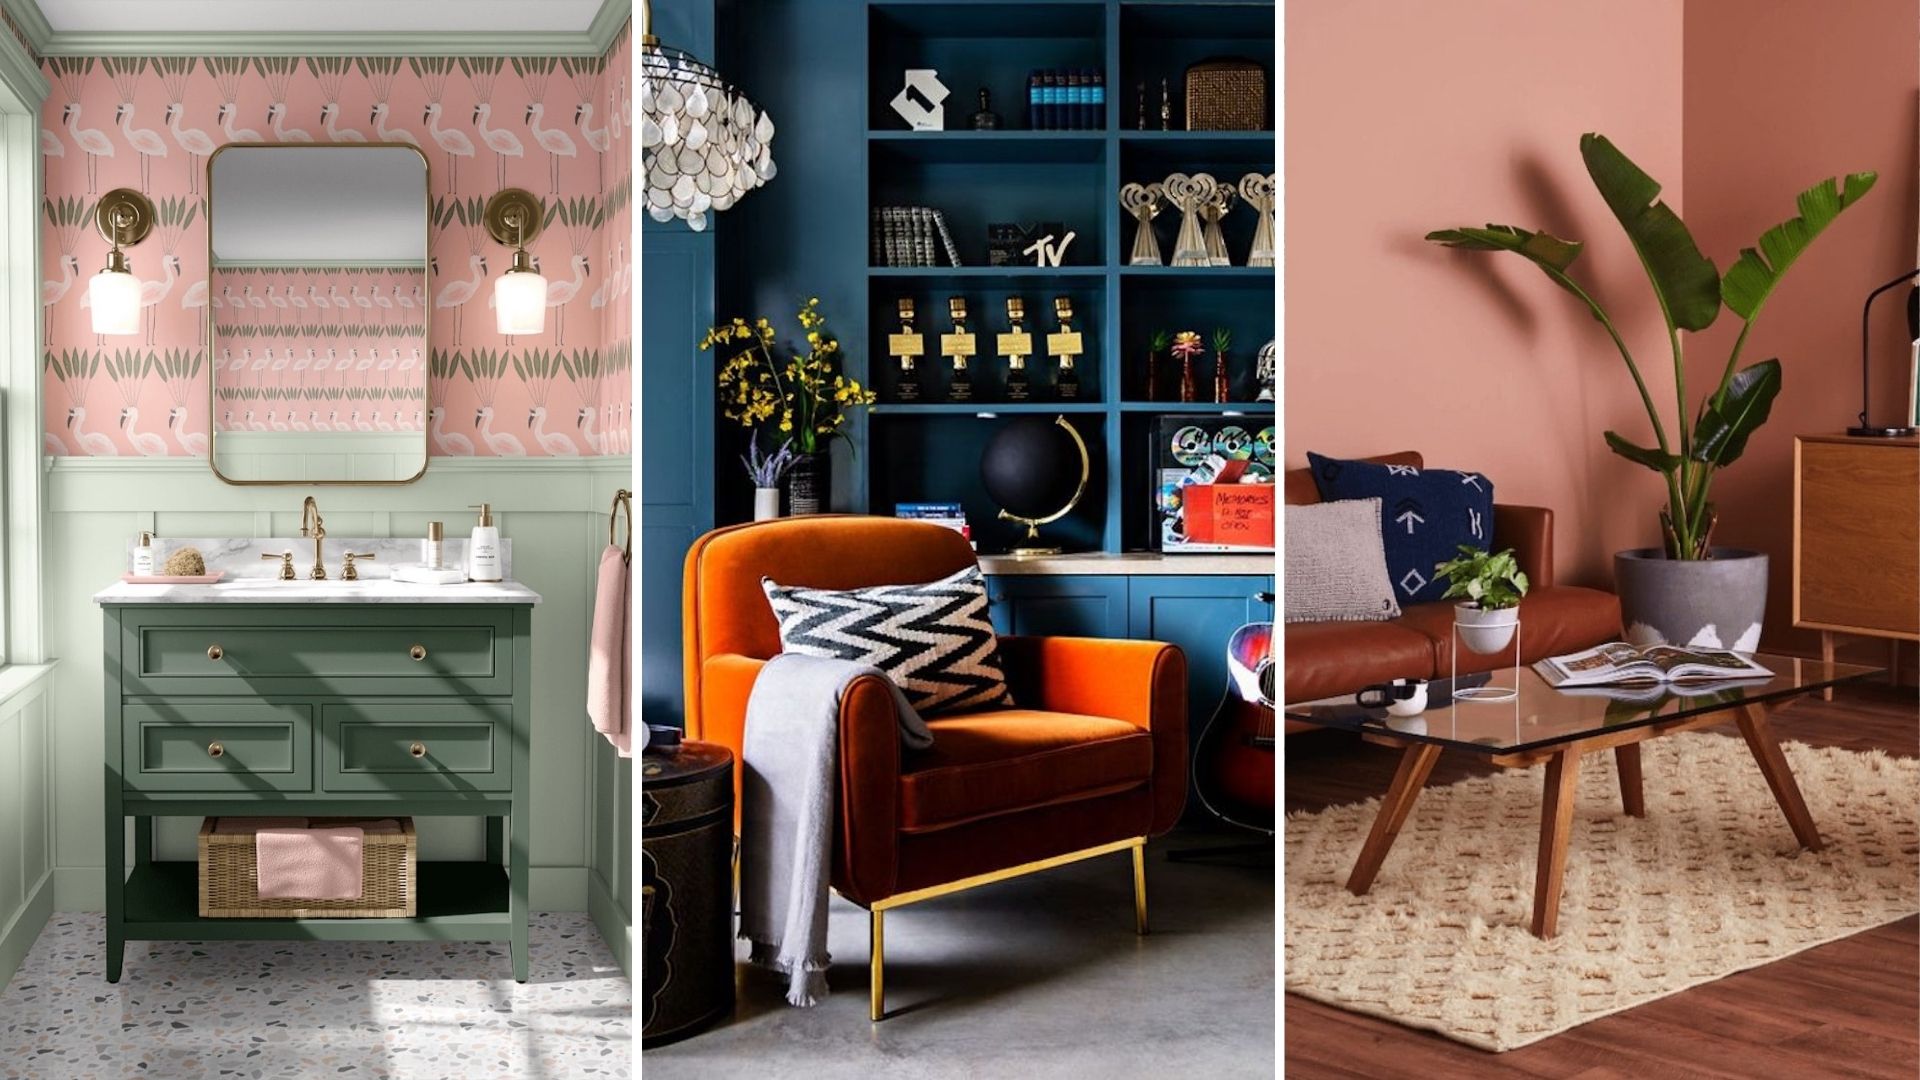 5 Unexpected Color Combinations In Interior Design That Actually Look Incredible